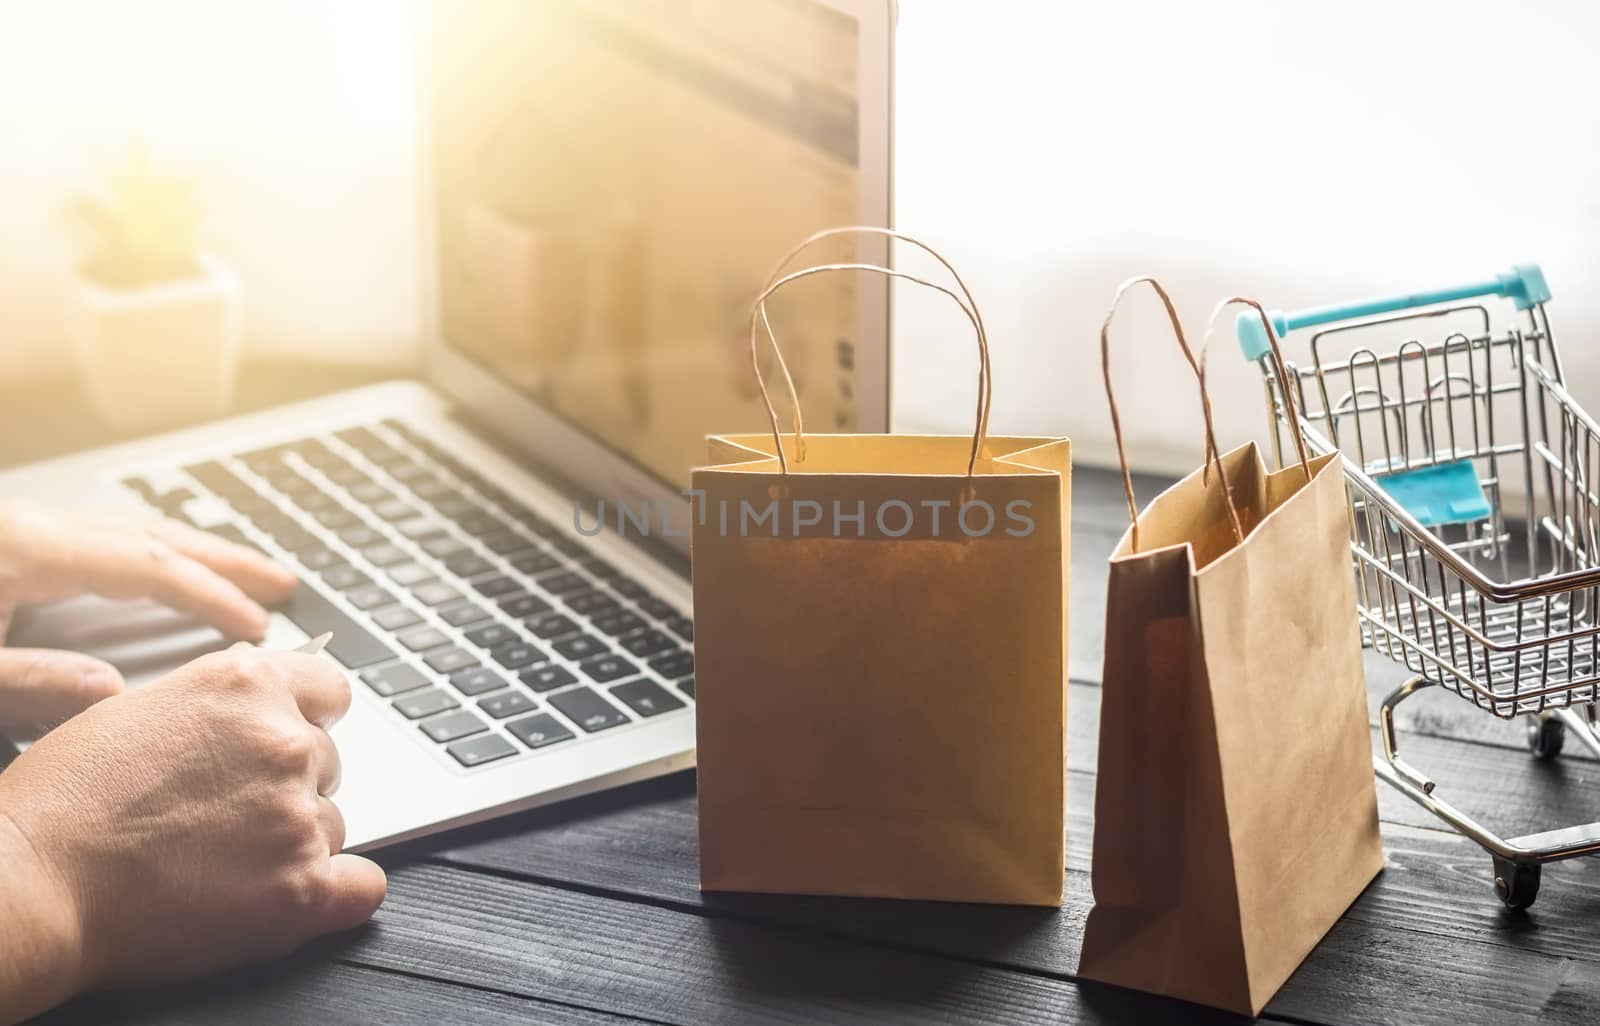 Vienna Austria June.16 2018, Online shopping concept, young men using laptop and holding credit card , selective focus on shopping bags